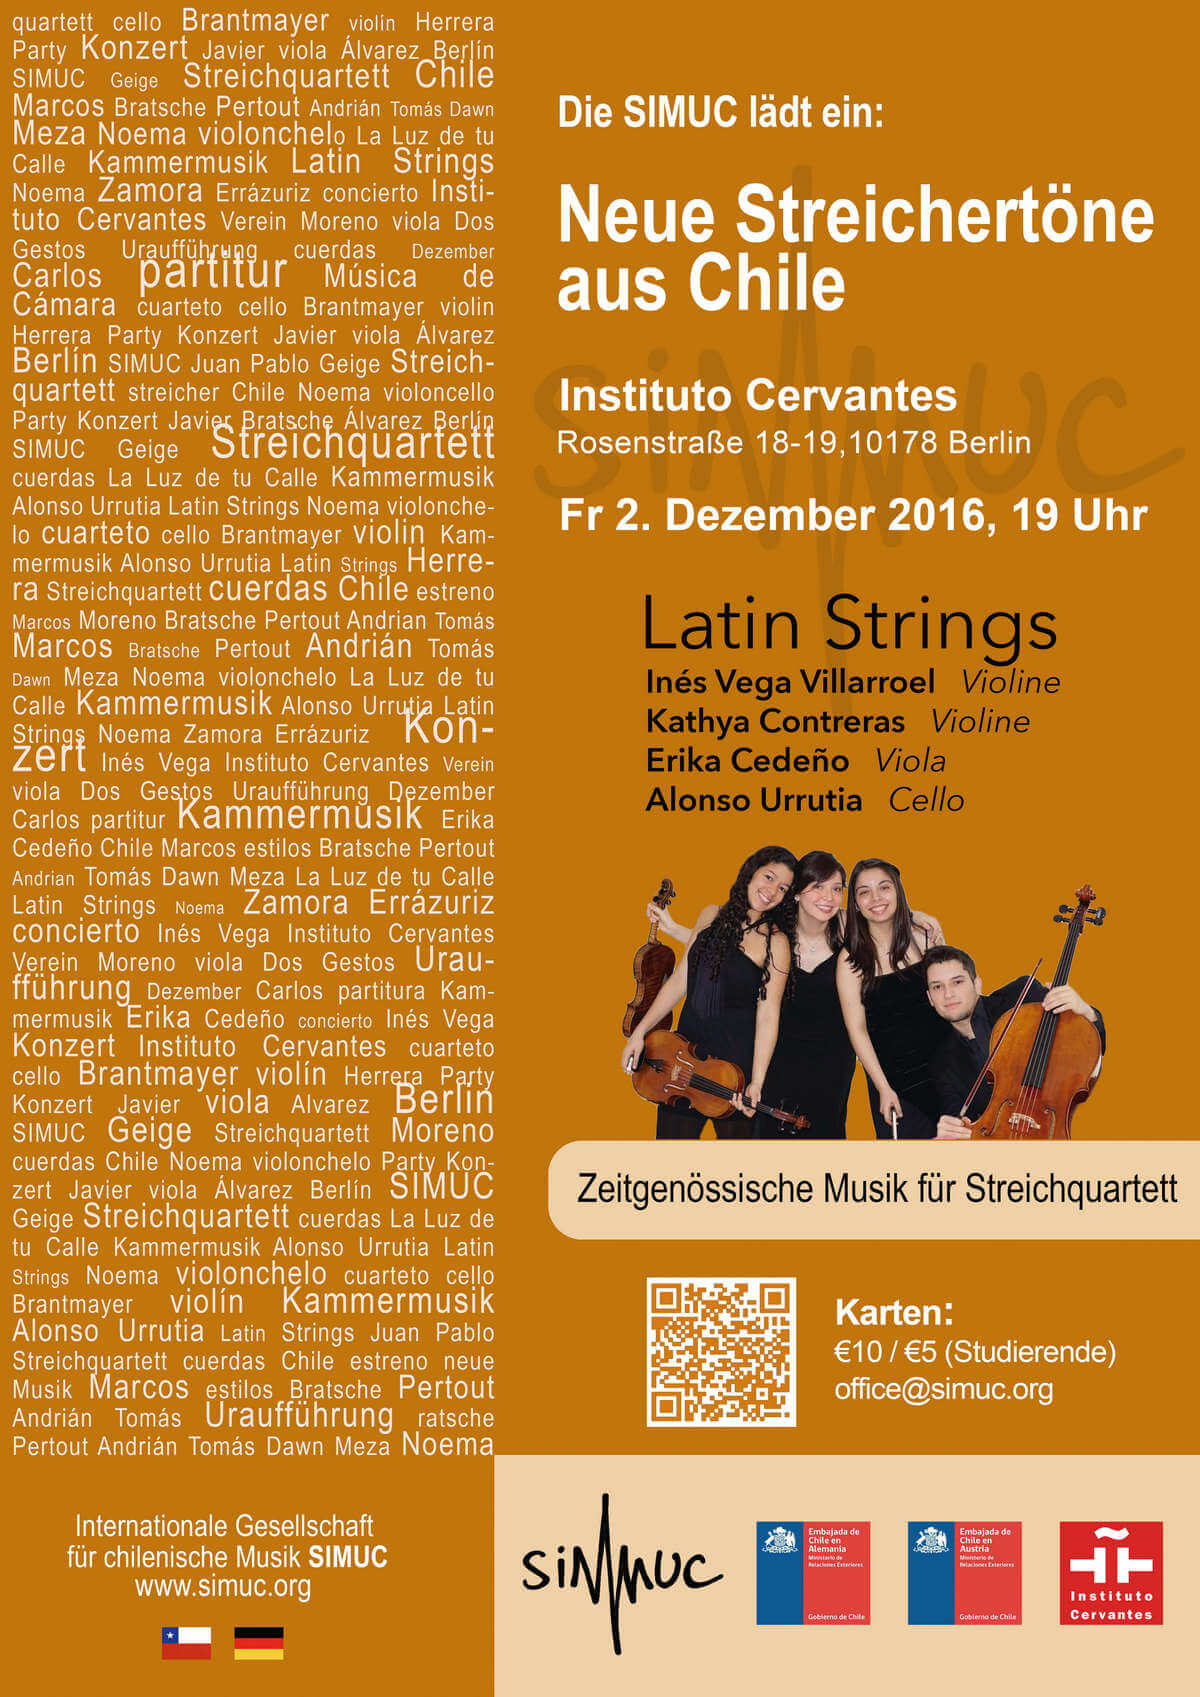 New String Tones from Chile